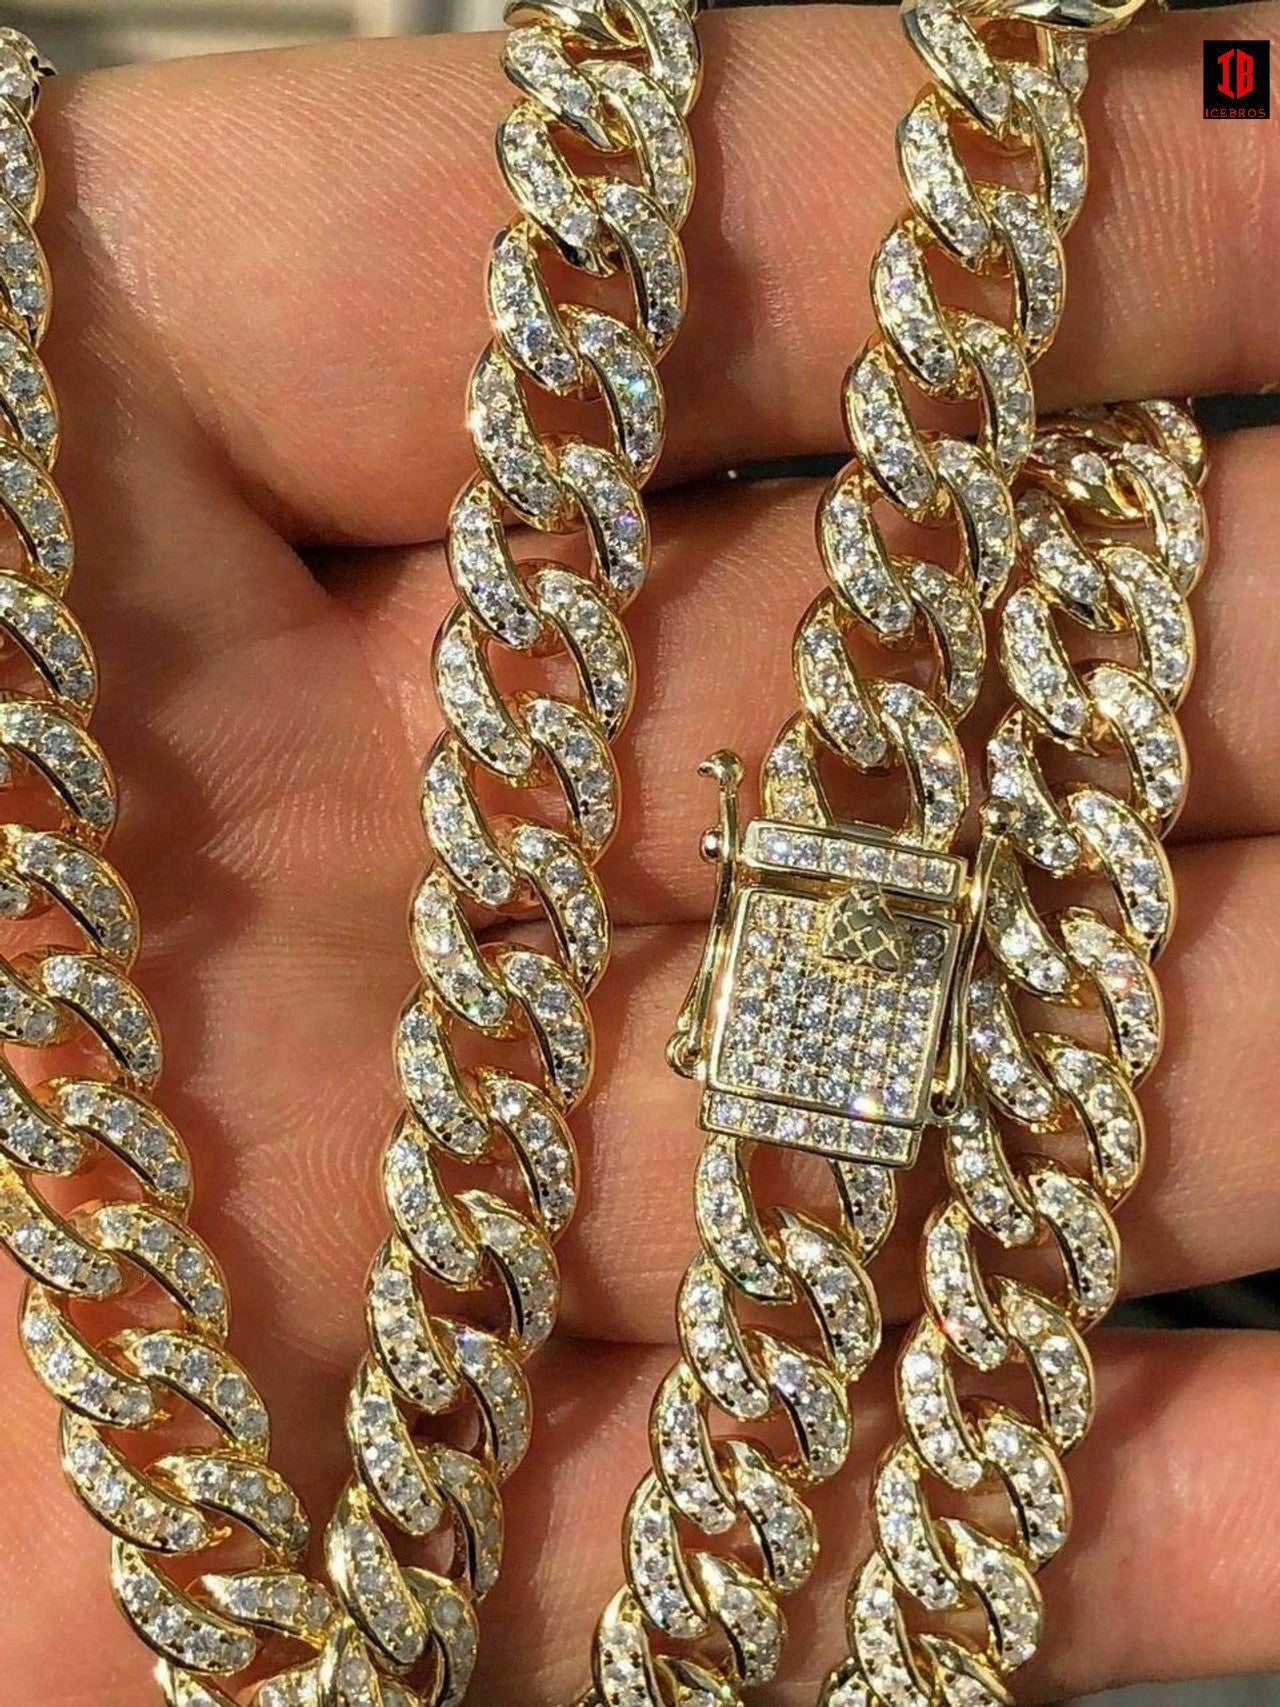 YELLOW GOLD Mens Miami Cuban Link 9mm Chain 14k Gold Over Solid 925 Silver 25ct Man Made Diamonds